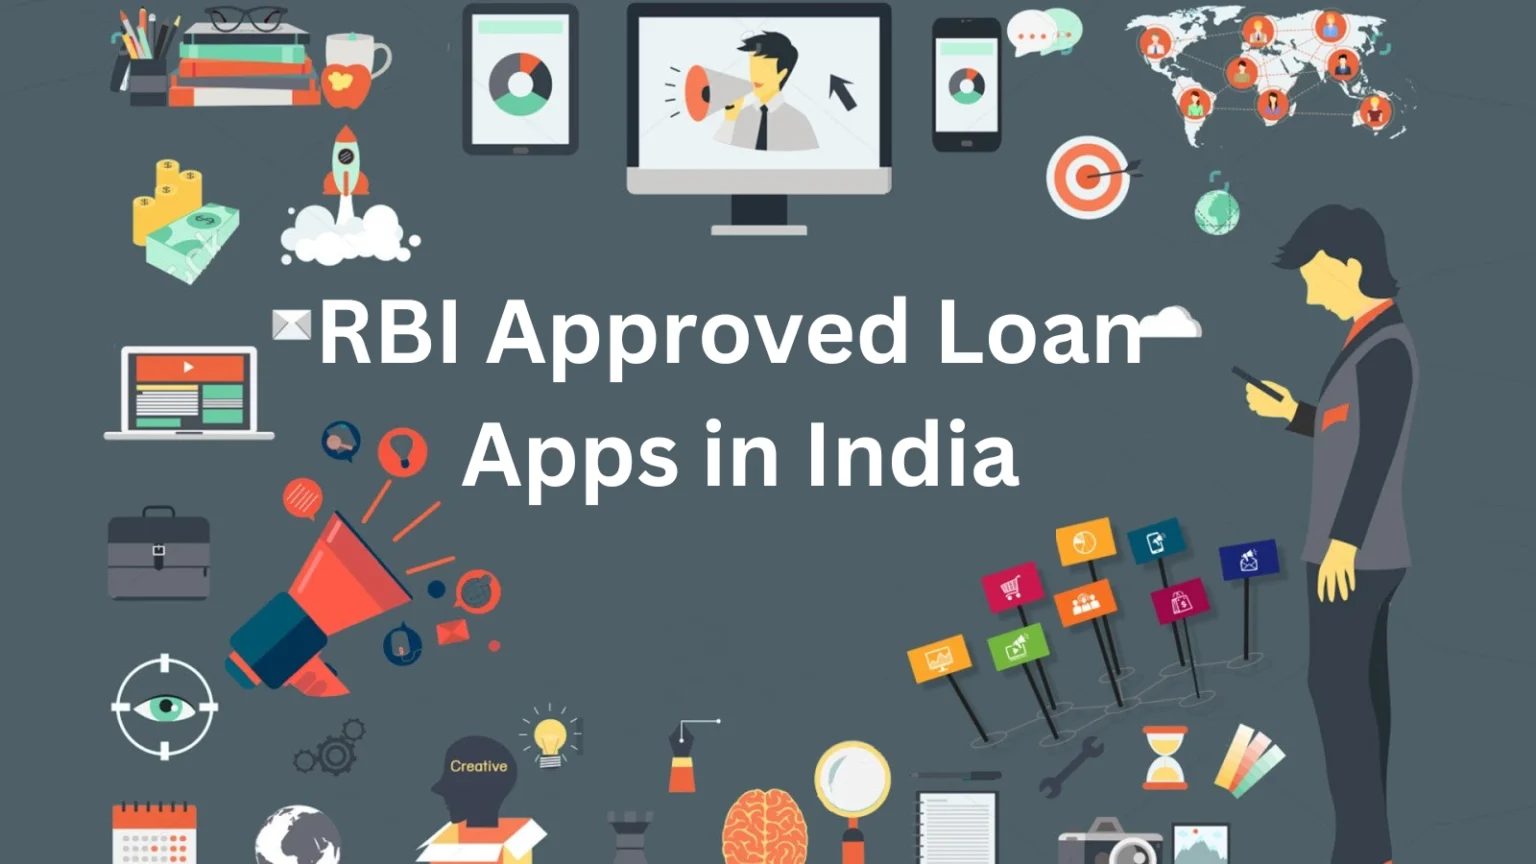 RBI Approved loan apps